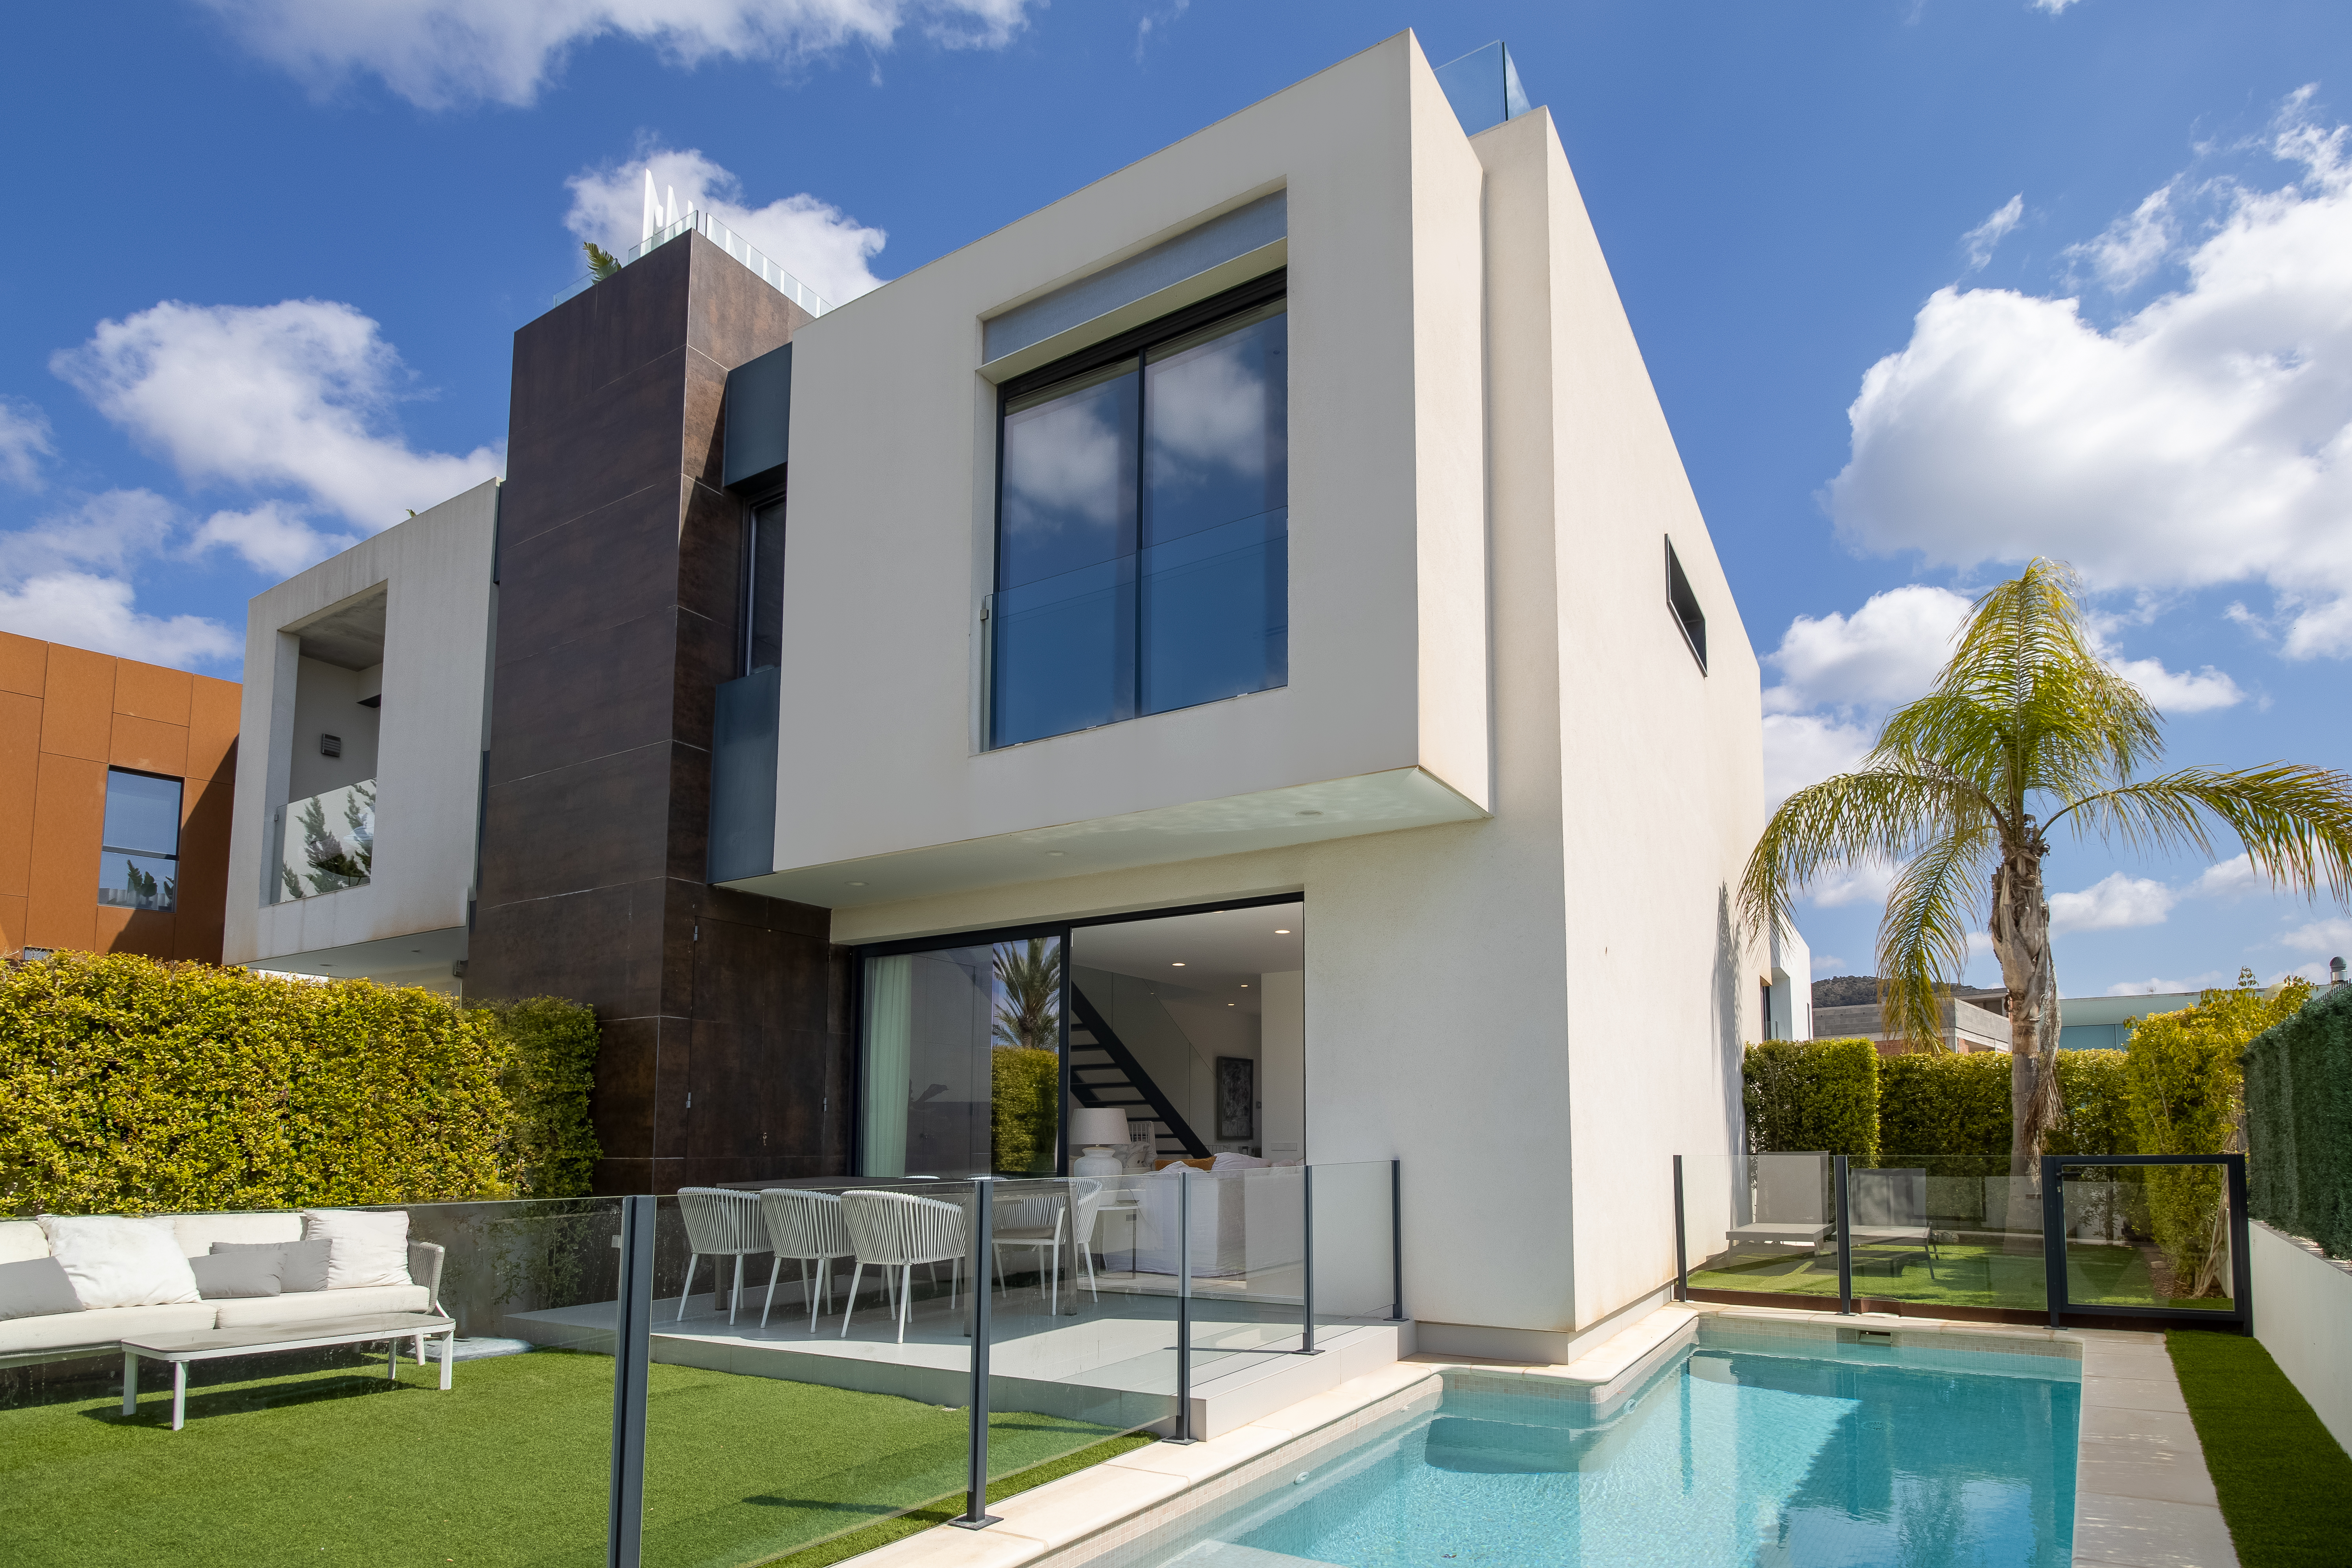 Beautiful elegant and bright house with a modern design in Talamanca